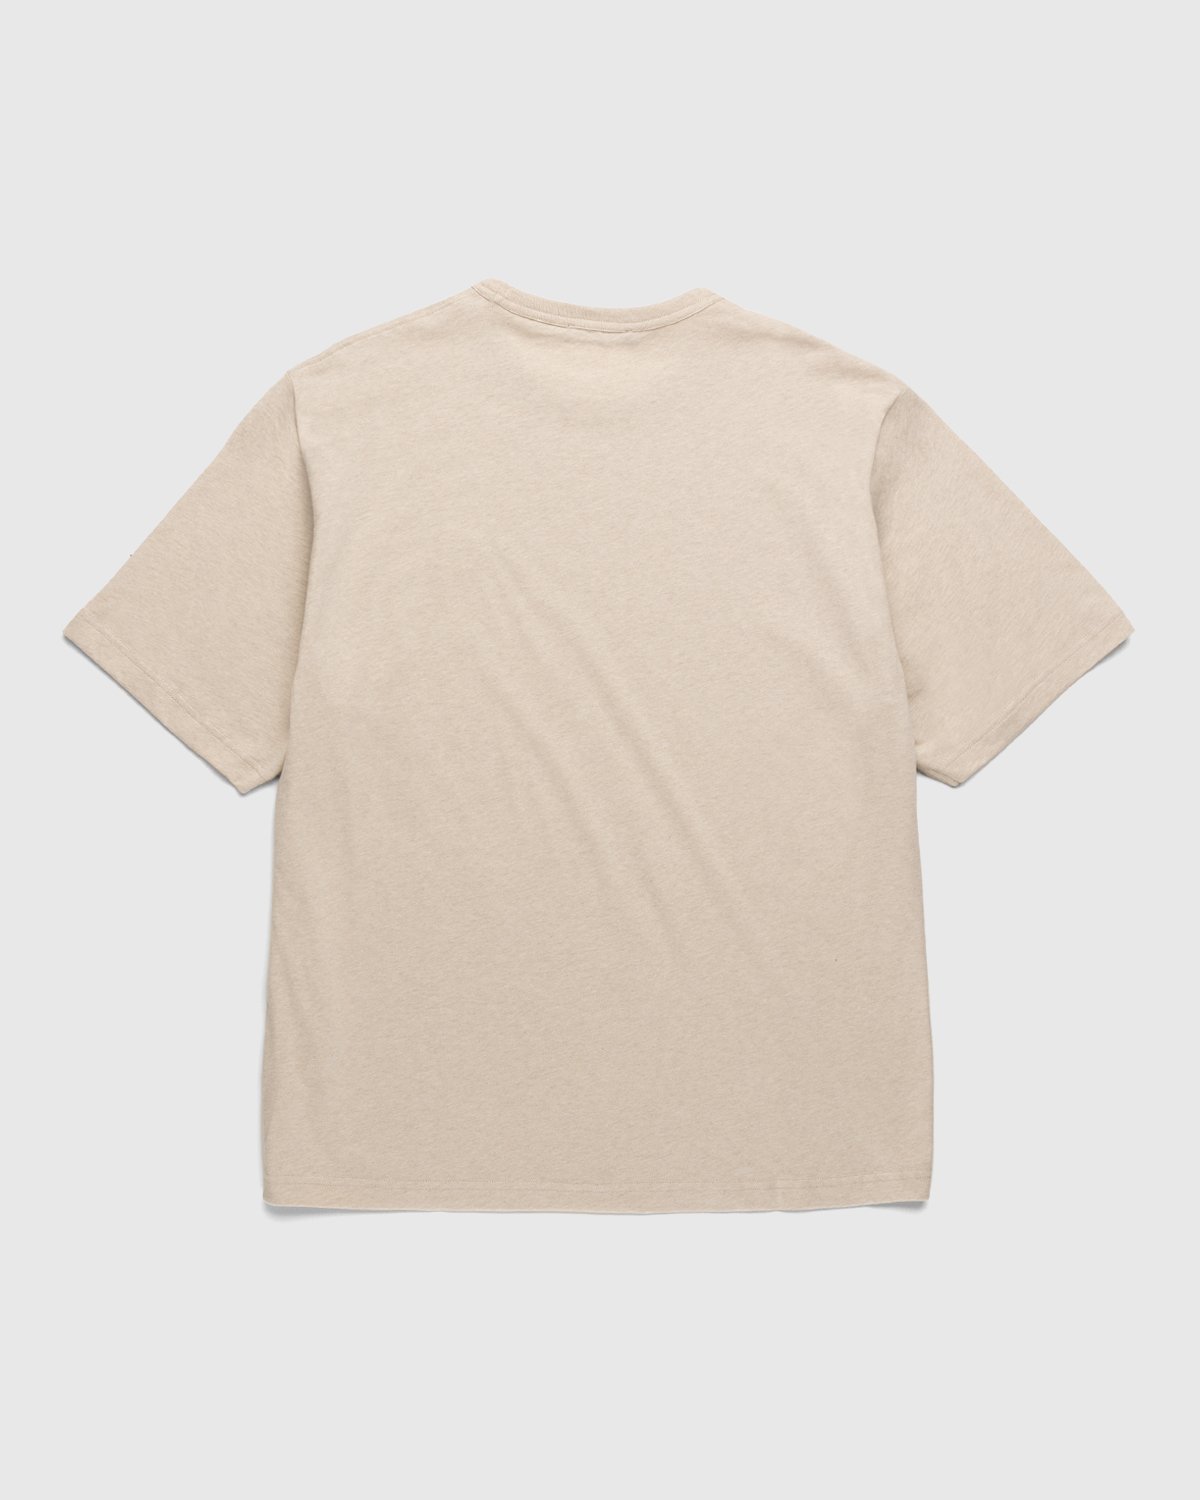 Acne Studios - Relaxed Fit T-Shirt Oatmeal Melange - Clothing - Beige - Image 2